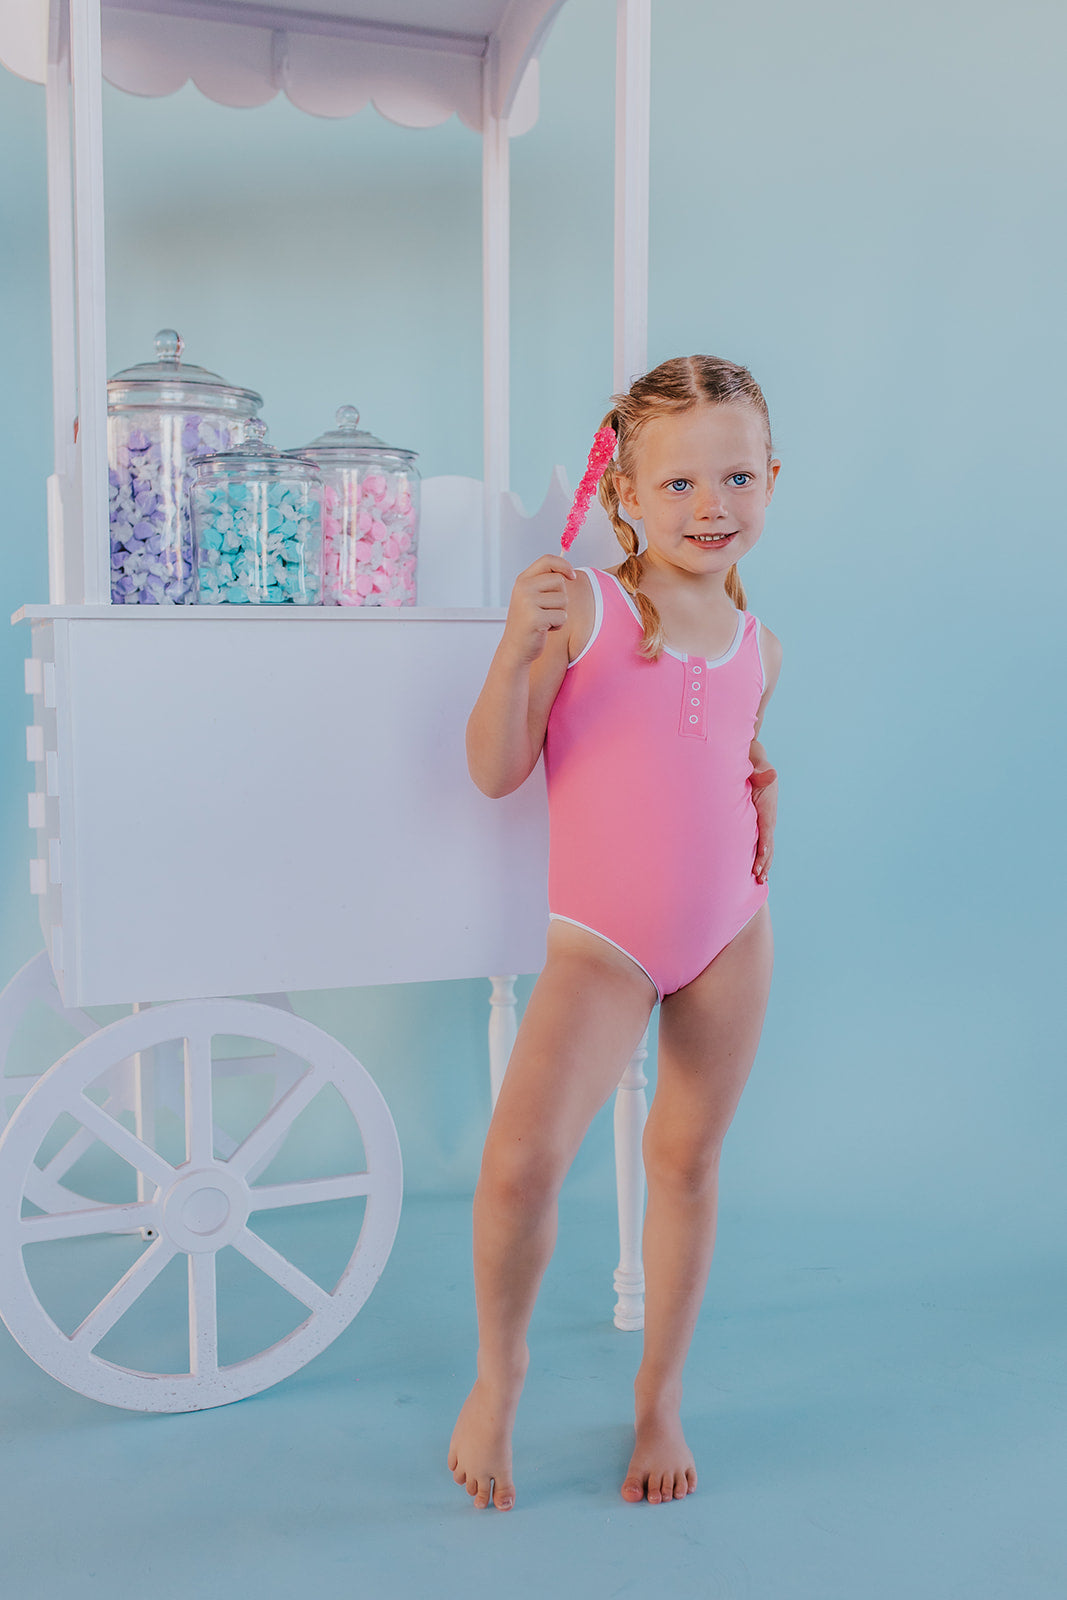 GIRLS BUTTON FRONT ONE PIECE IN COTTON CANDY PINK BY SARAH TRIPP X PINK DESERT